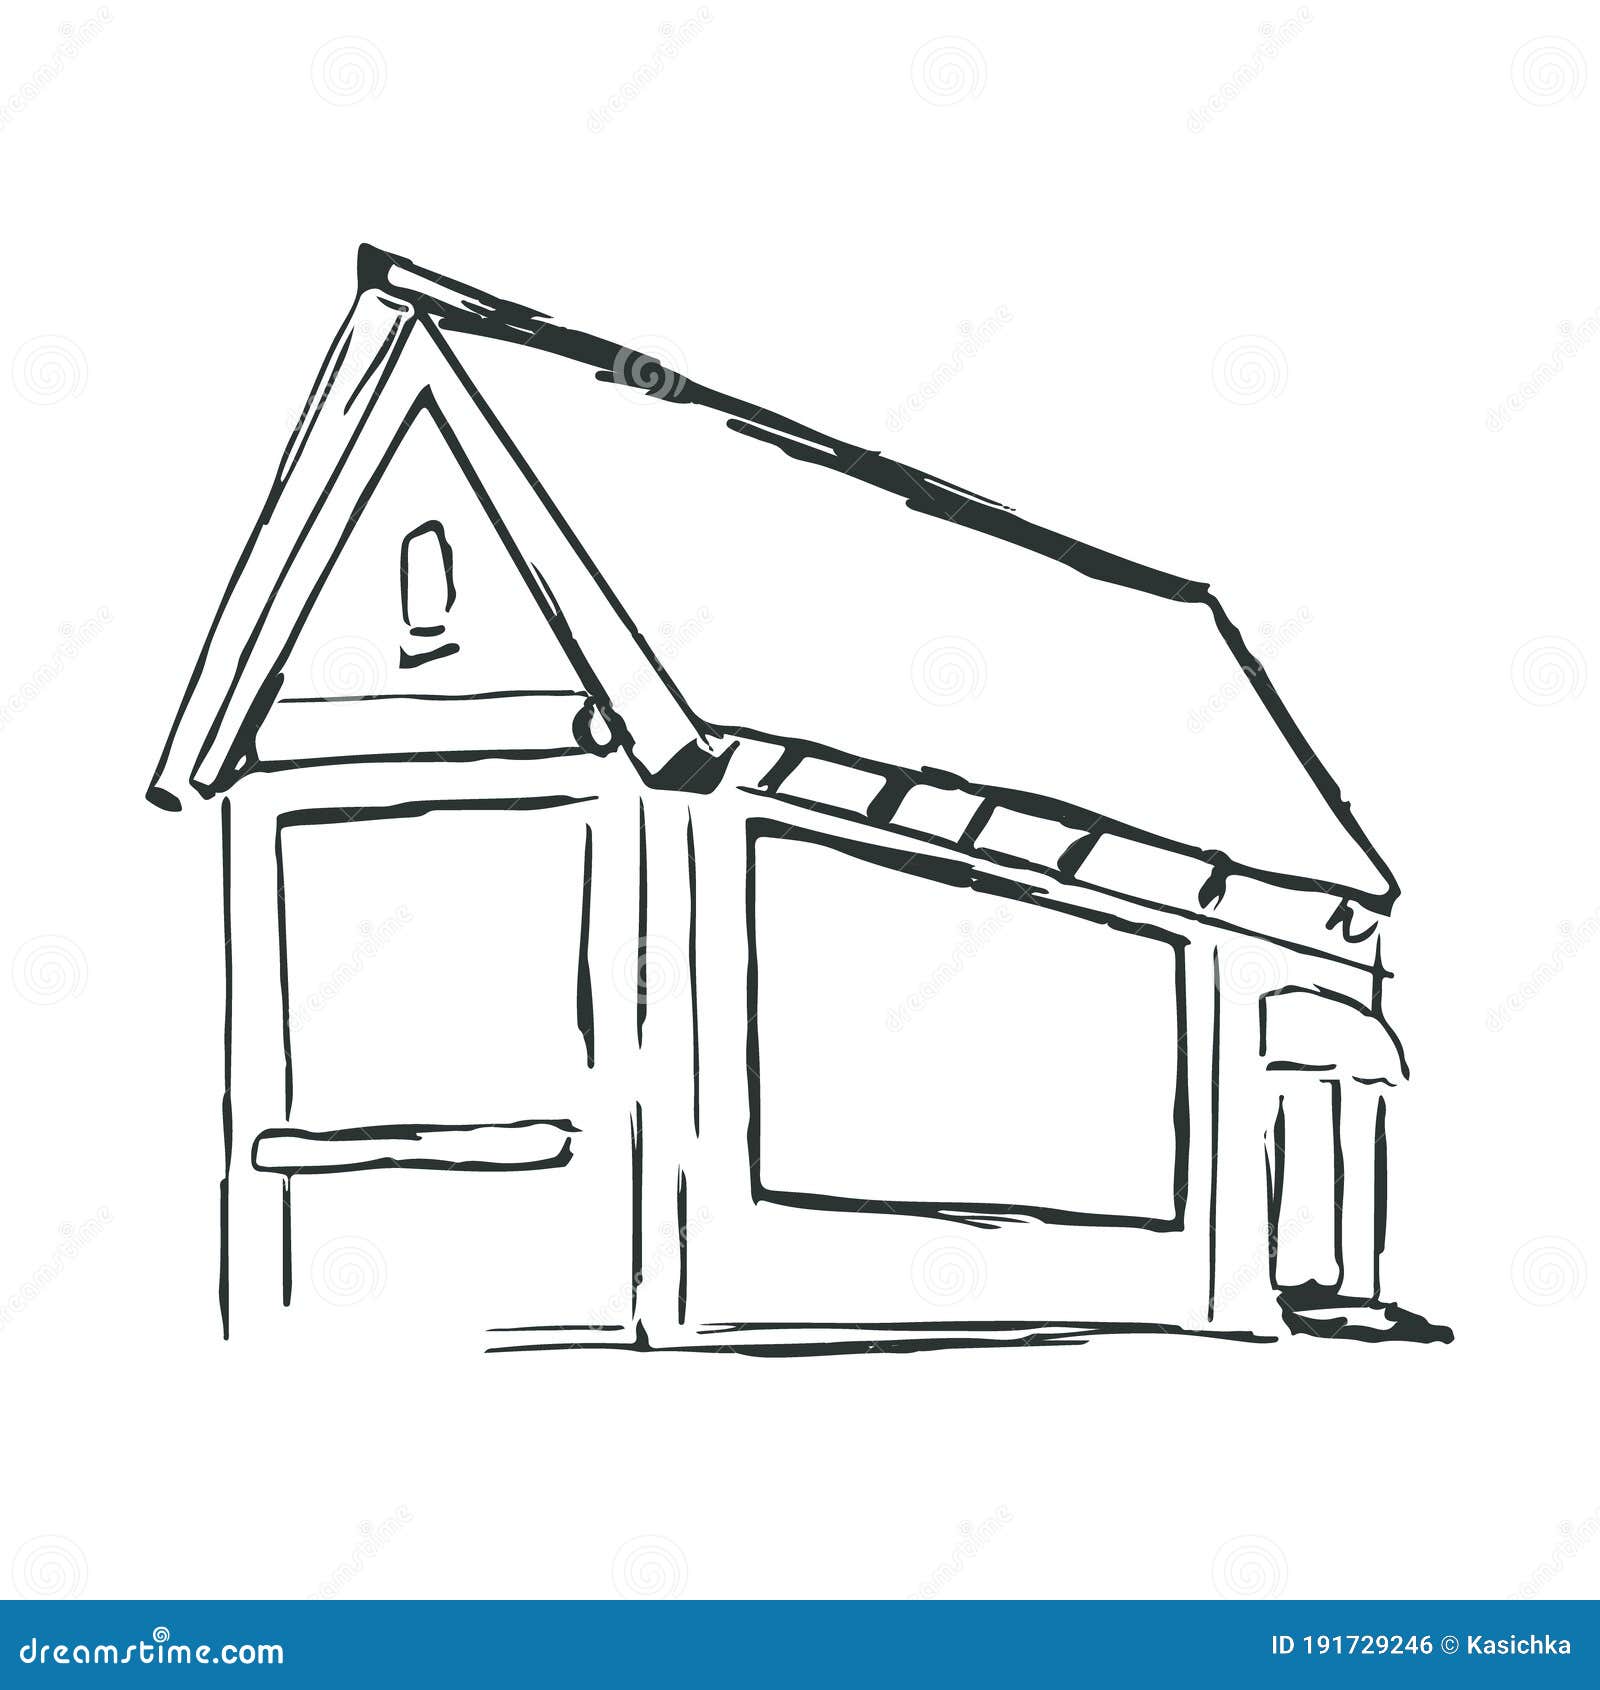 House drawing for kids on Pinterest